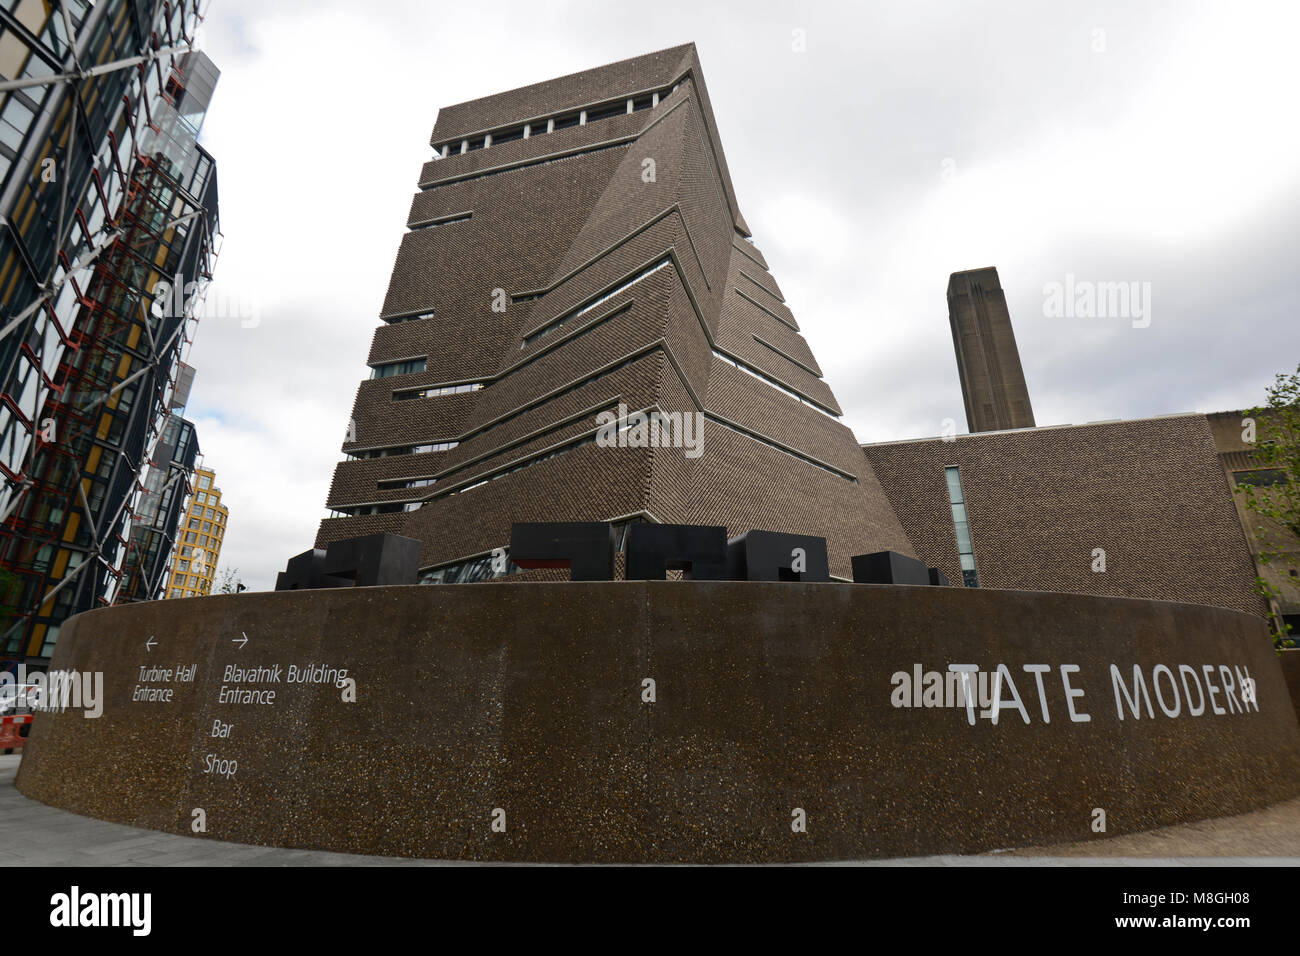 Tate Modern Gallery, London. Lateral view Stock Photo